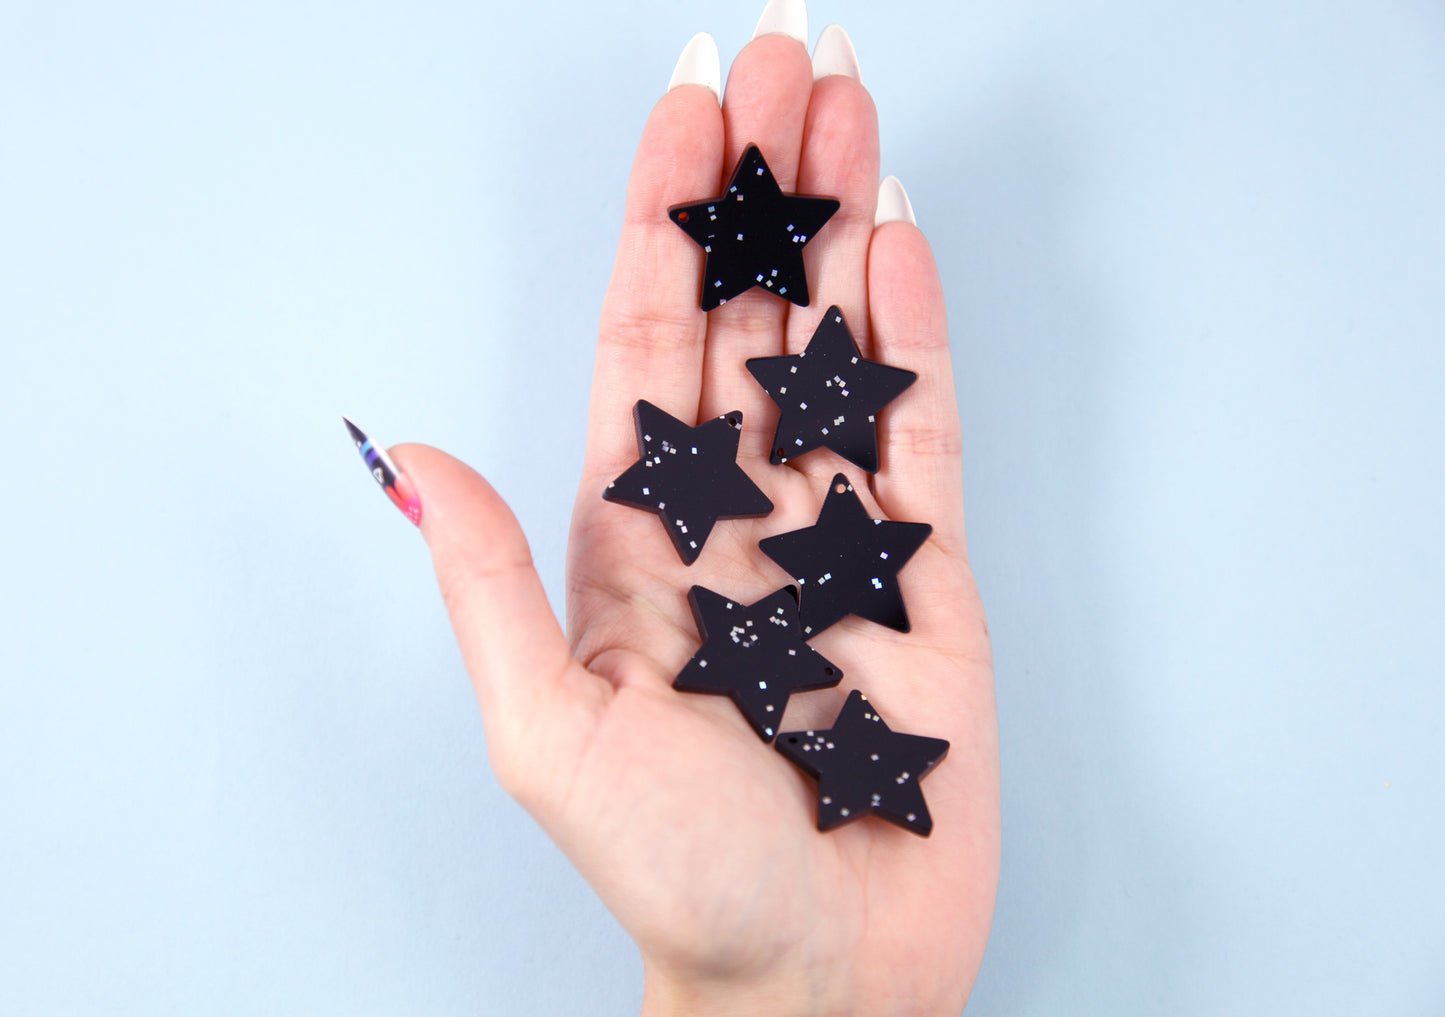 Star Charms - 30mm Black Glitter Star Acrylic or Resin Charms - 6 pc set